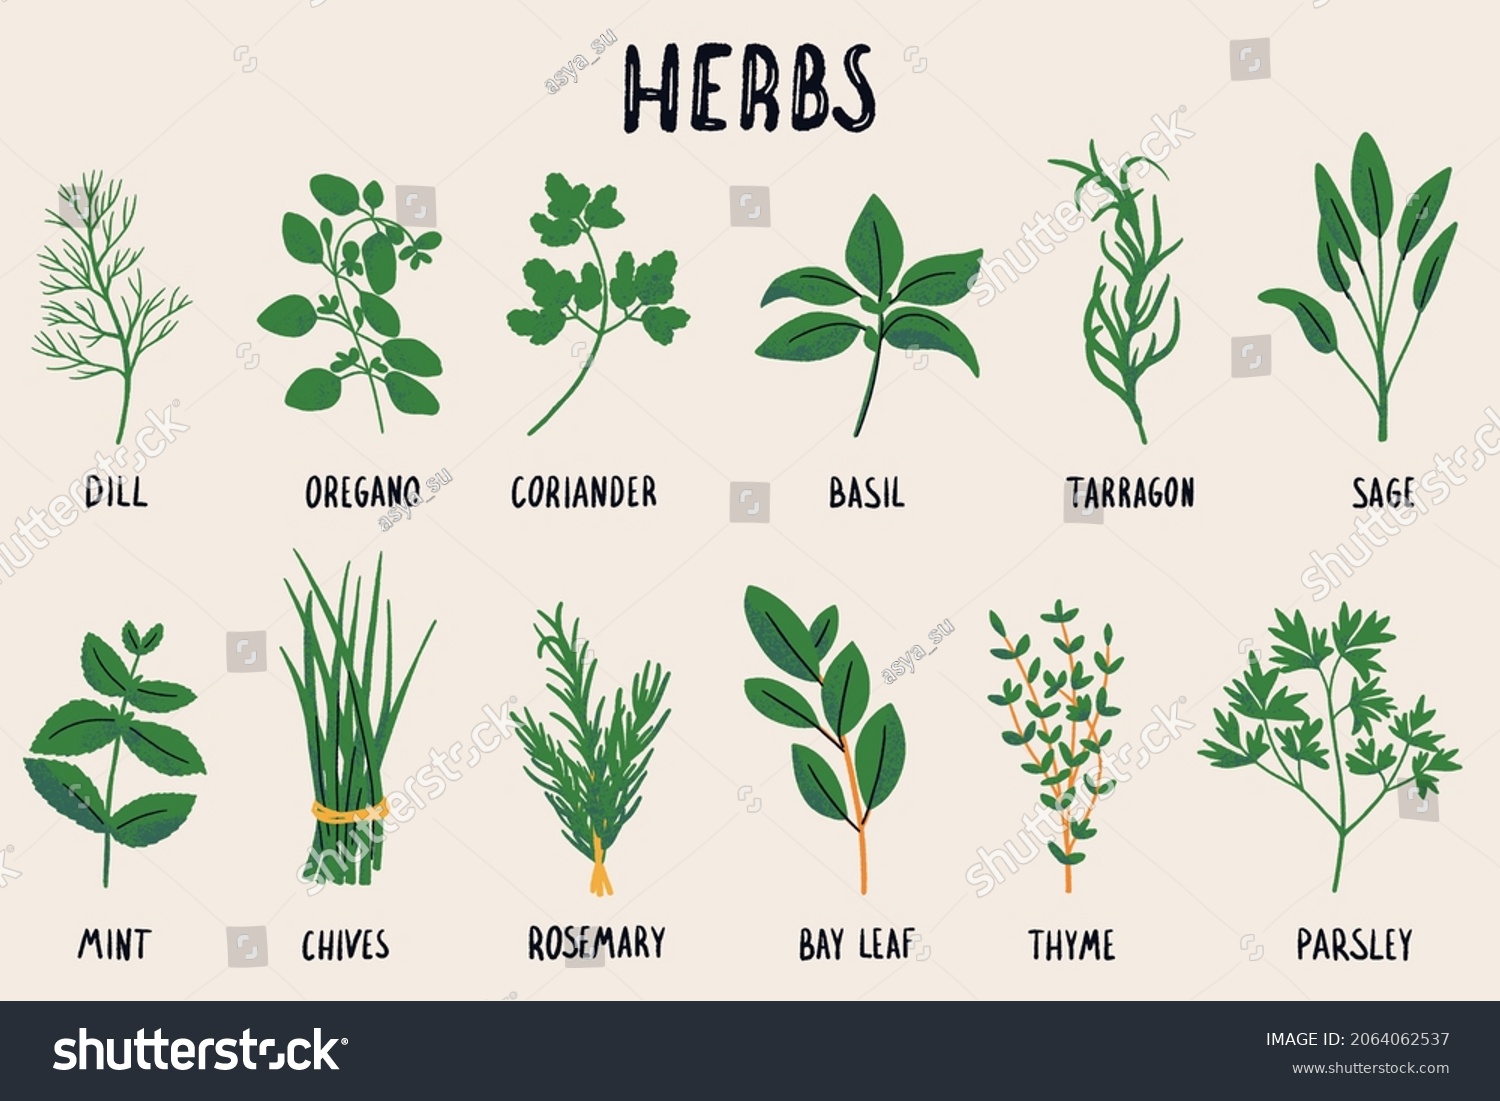 SVG of Herbs set isolated vector illustration in hand drawn flat style. Such as dill, oregano, tarragon, mint, rosemary, parsley, coriander, thyme, basil, bay leaf, oregano, sage. Food magazine illustration svg